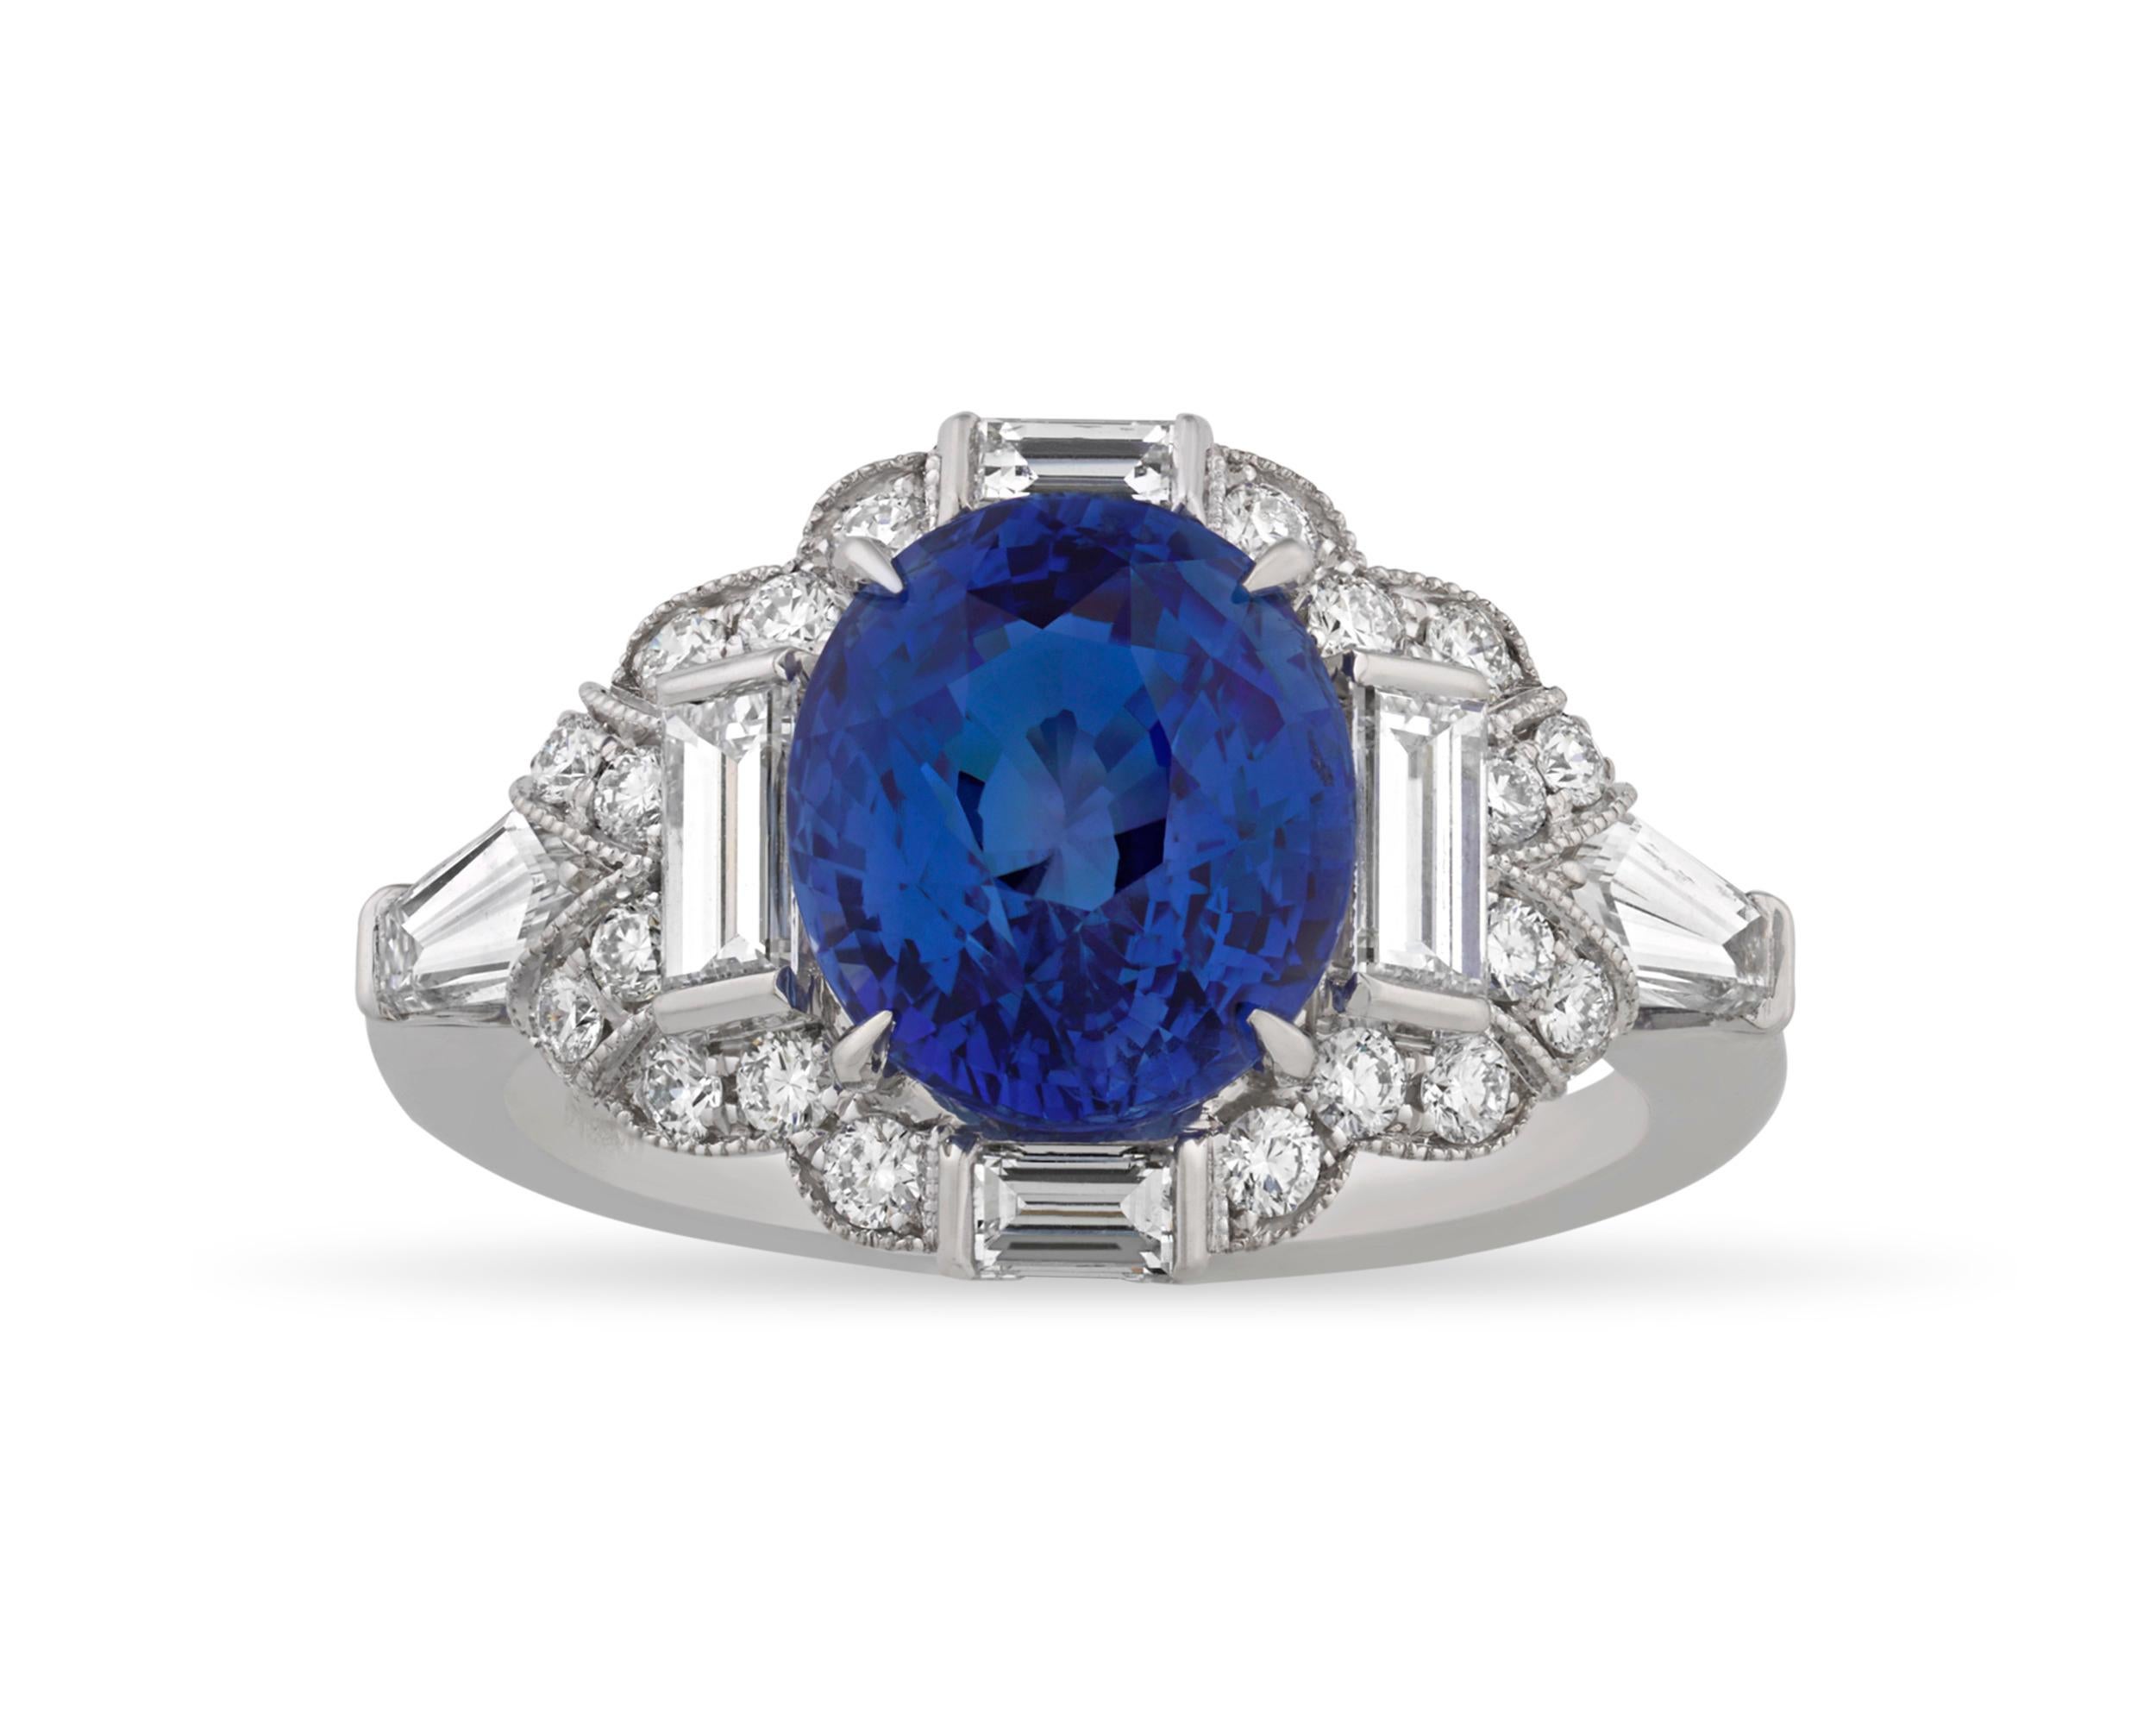 An exquisite, vibrant blue sapphire weighing 3.52 carats is mounted in this ring by celebrated American jeweler Raymond Yard. The colorful gem is complemented by 1.18 carats of white diamond accents in round, baguette and reverse taper baguette